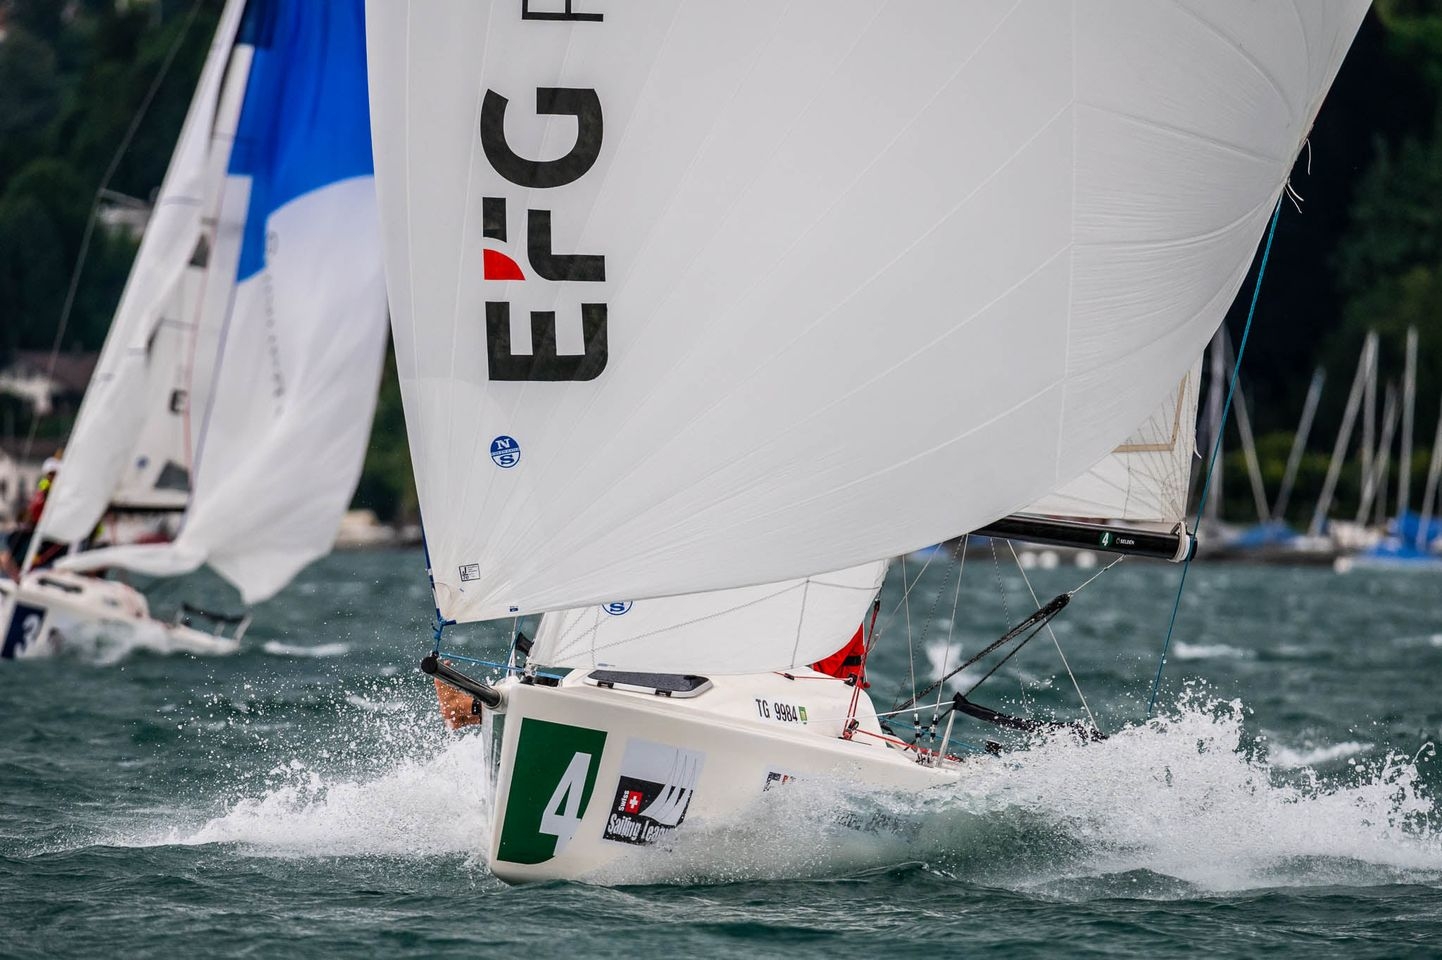  Swiss Sailing League  Youth Cup  RC Oberhofen  Final results